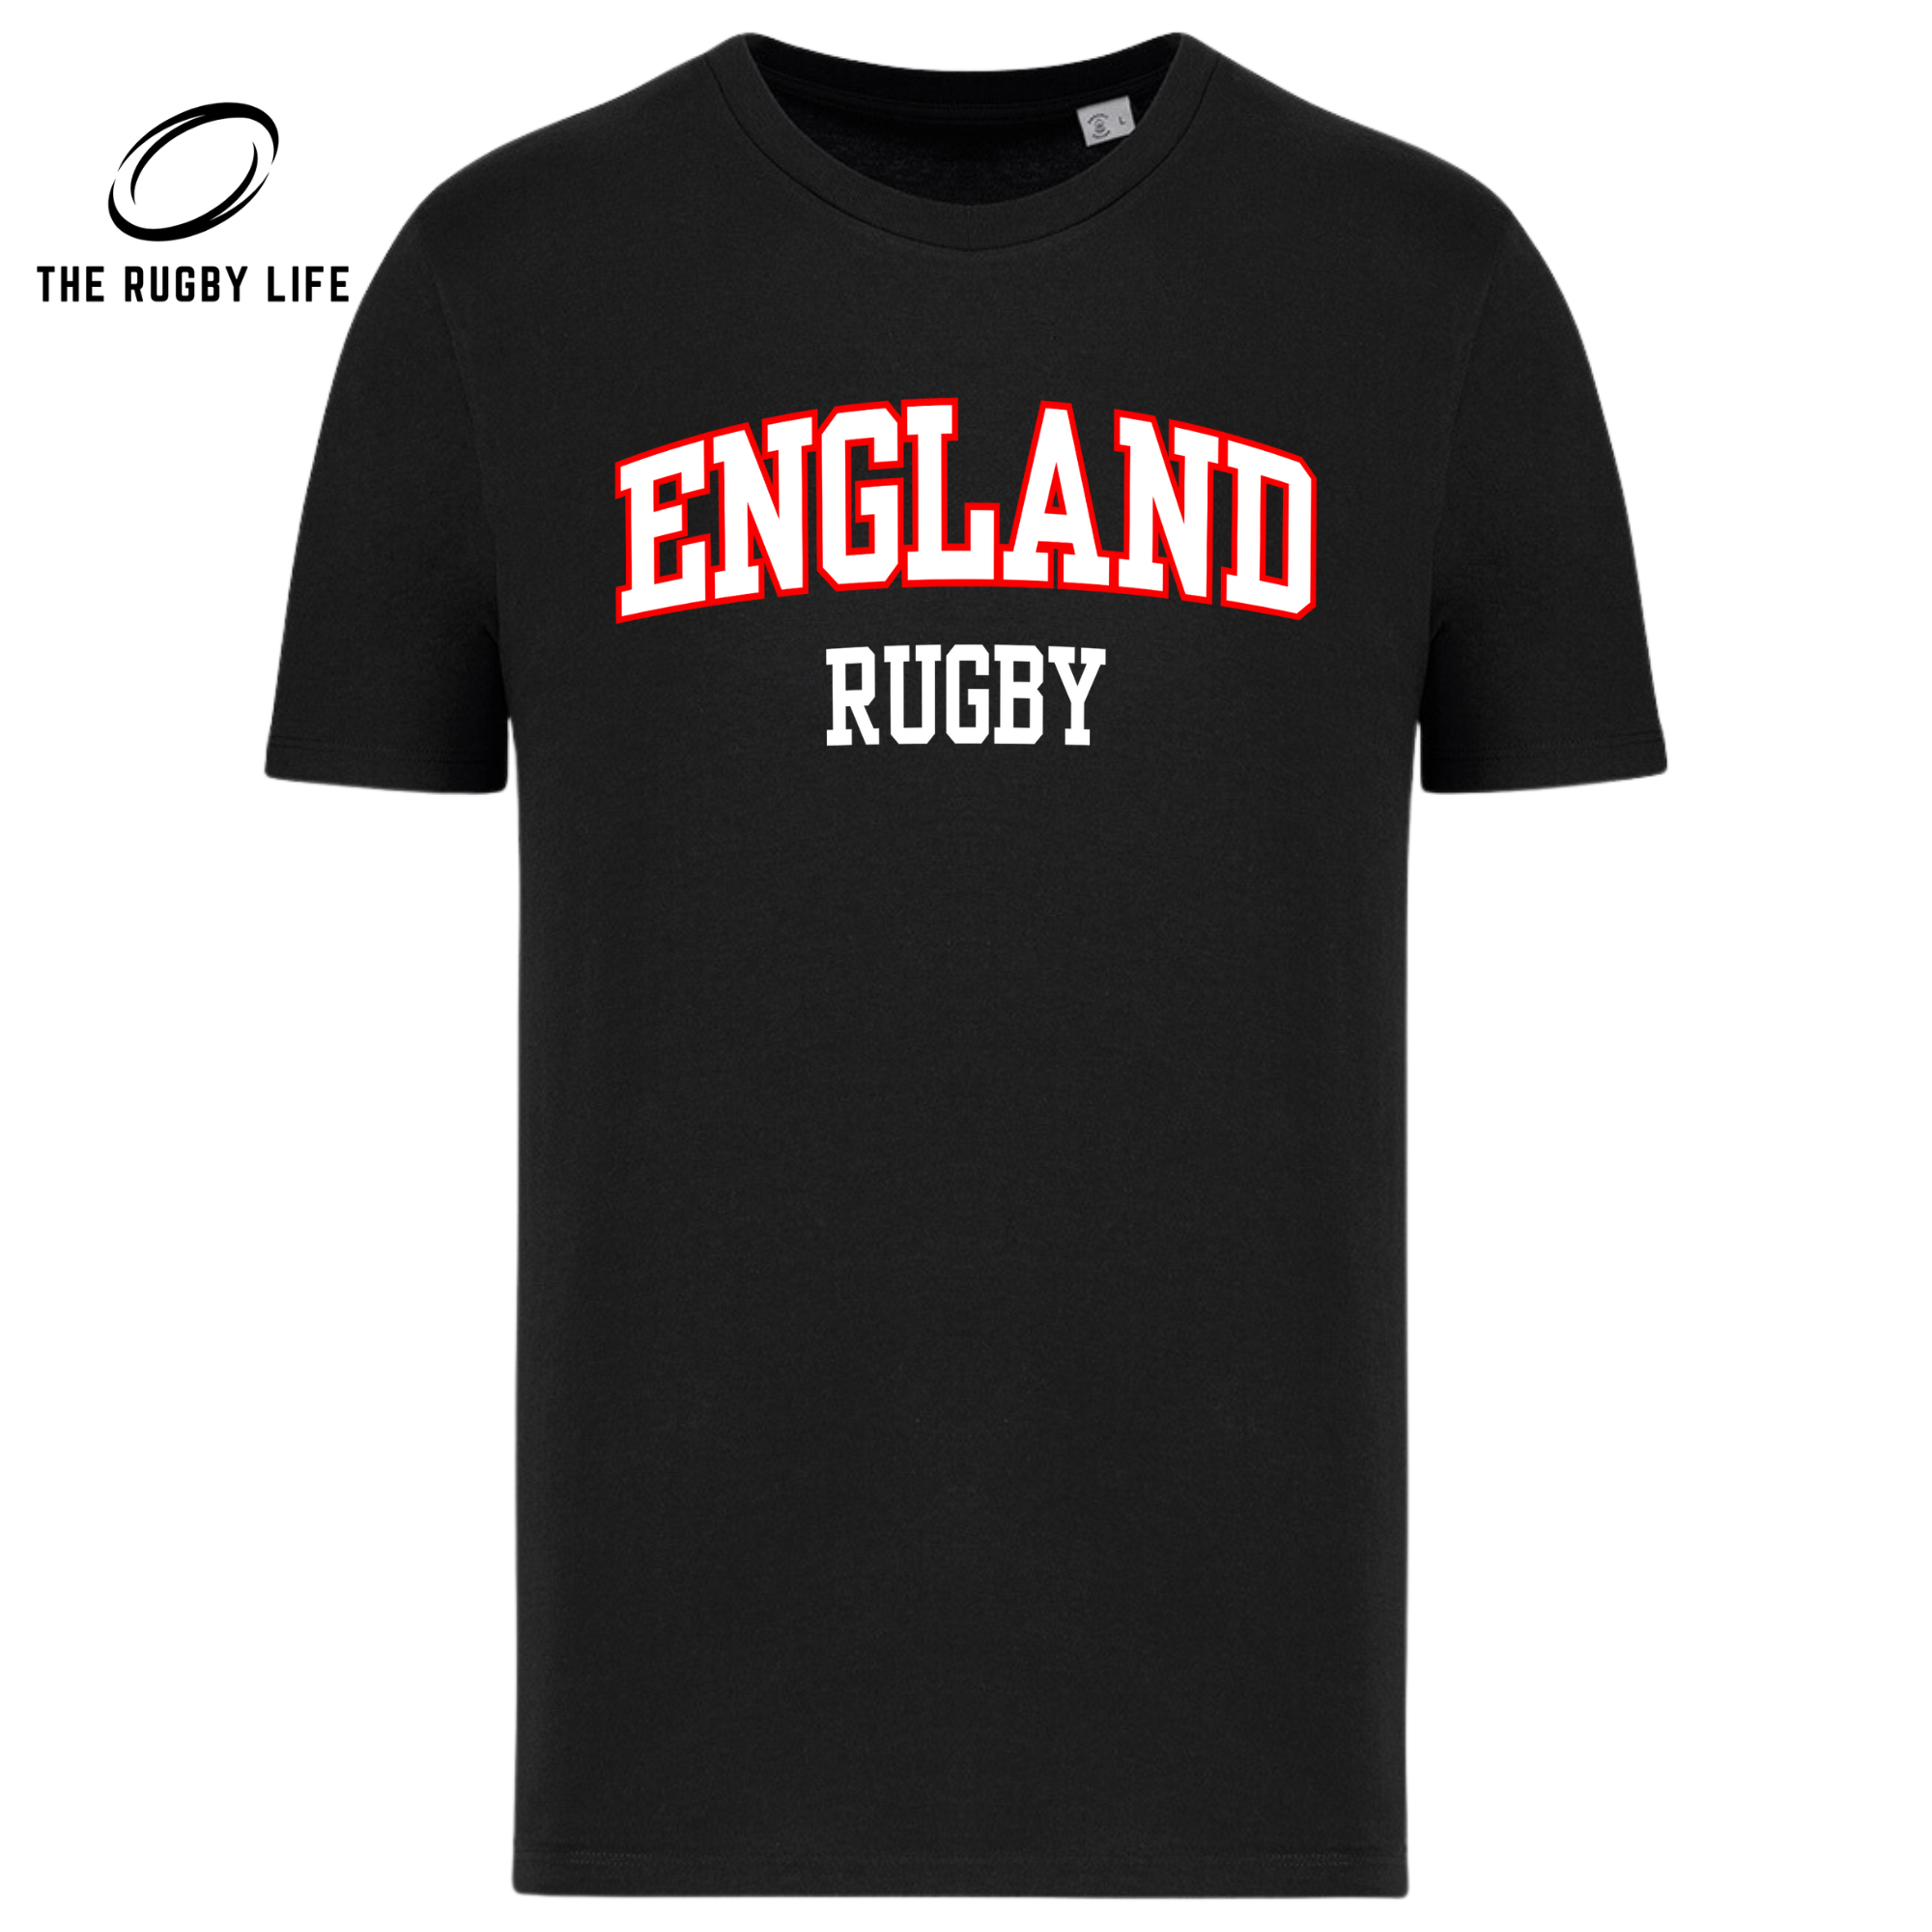 Premium England Rugby t-shirt | Black | The Rugby Life | Warped